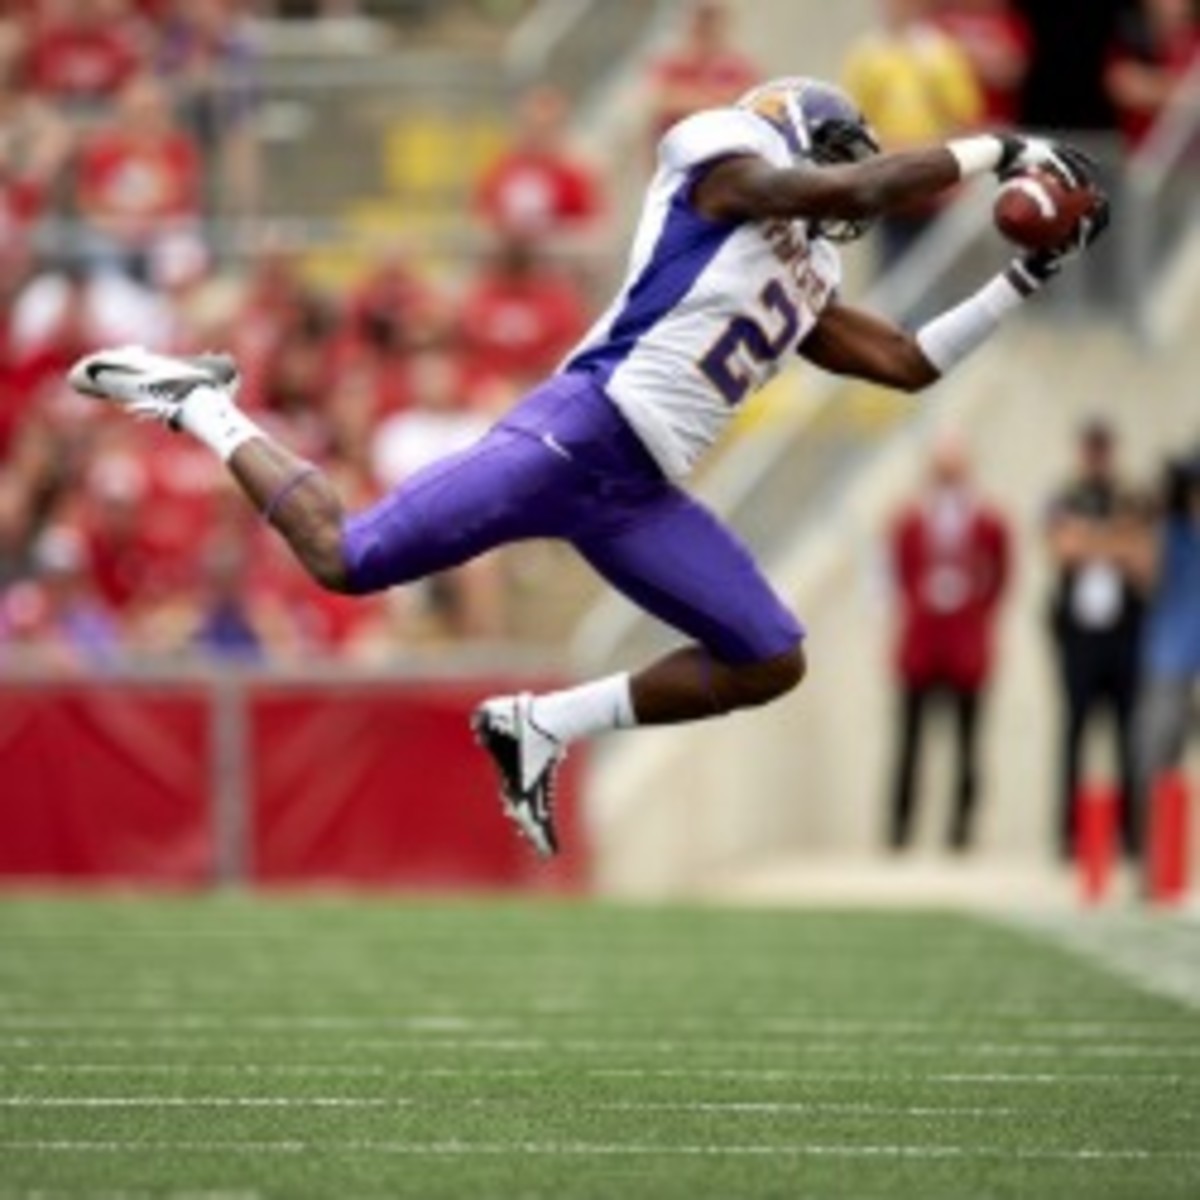 Northern Iowa wideout Terrell Sinkfield reportedly ran the 40-yard dash in 4.19 seconds. (Photo by John Biever /Sports Illustrated)